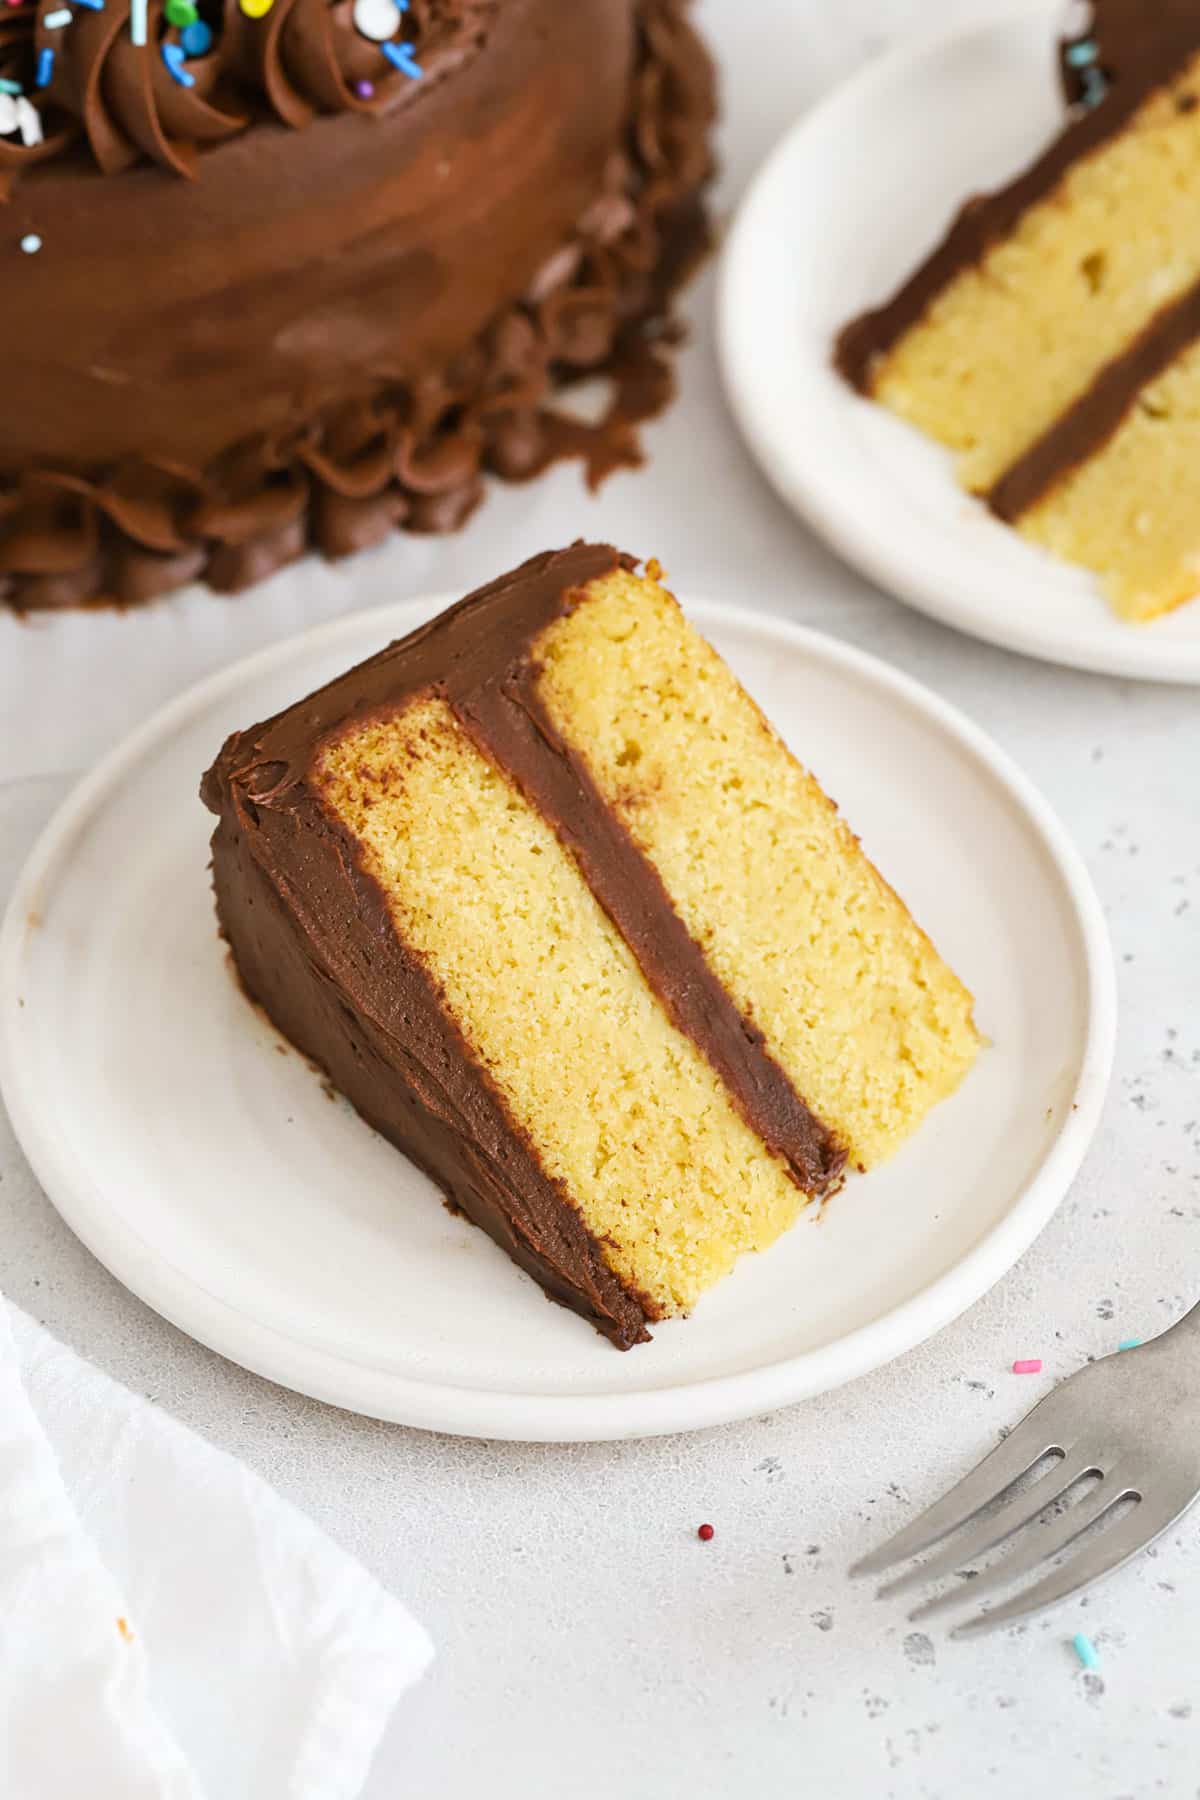 Slices of gluten-free yellow cake with chocolate frosting on white plates